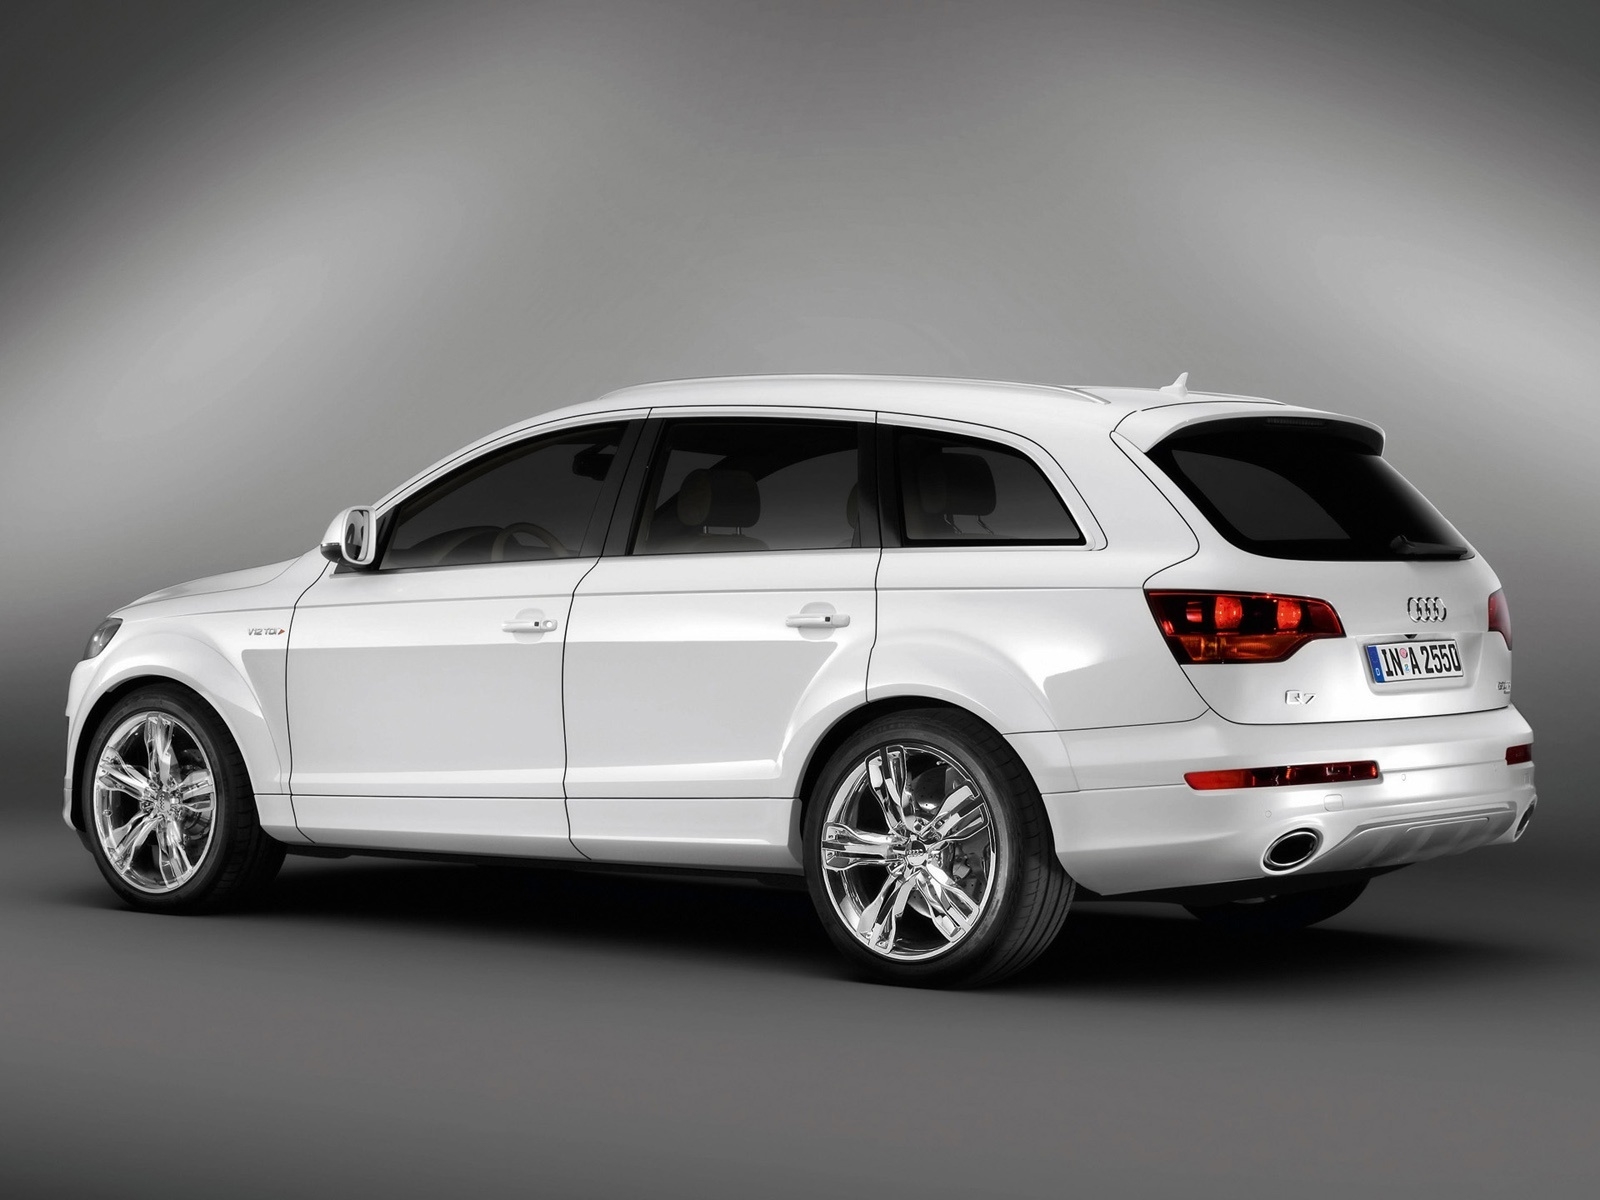 Audi Q7 Coastline Rear and Side for 1600 x 1200 resolution